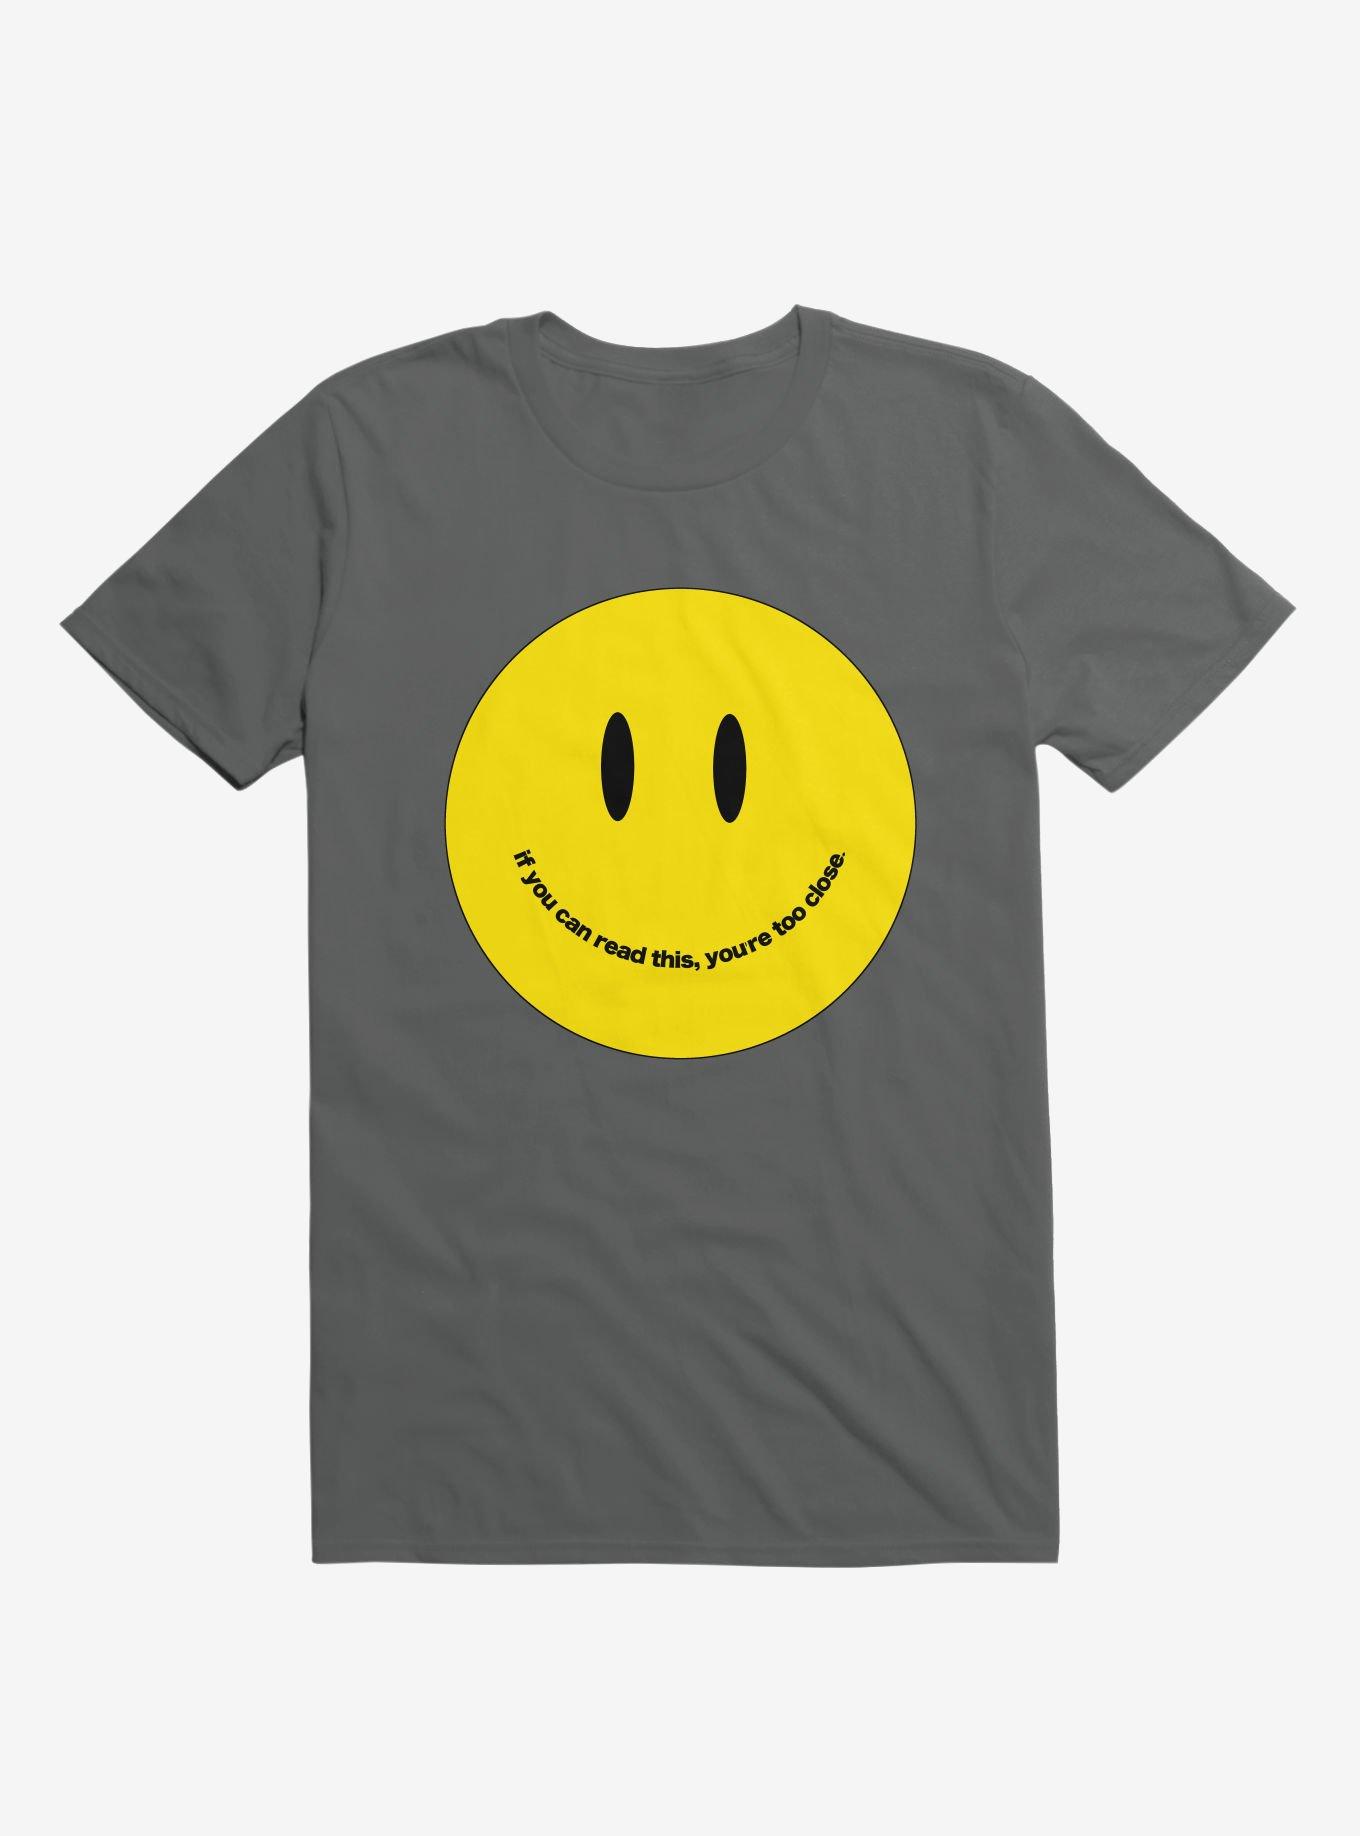 You're Too Close Smile Face Charcoal Grey T-Shirt, CHARCOAL, hi-res